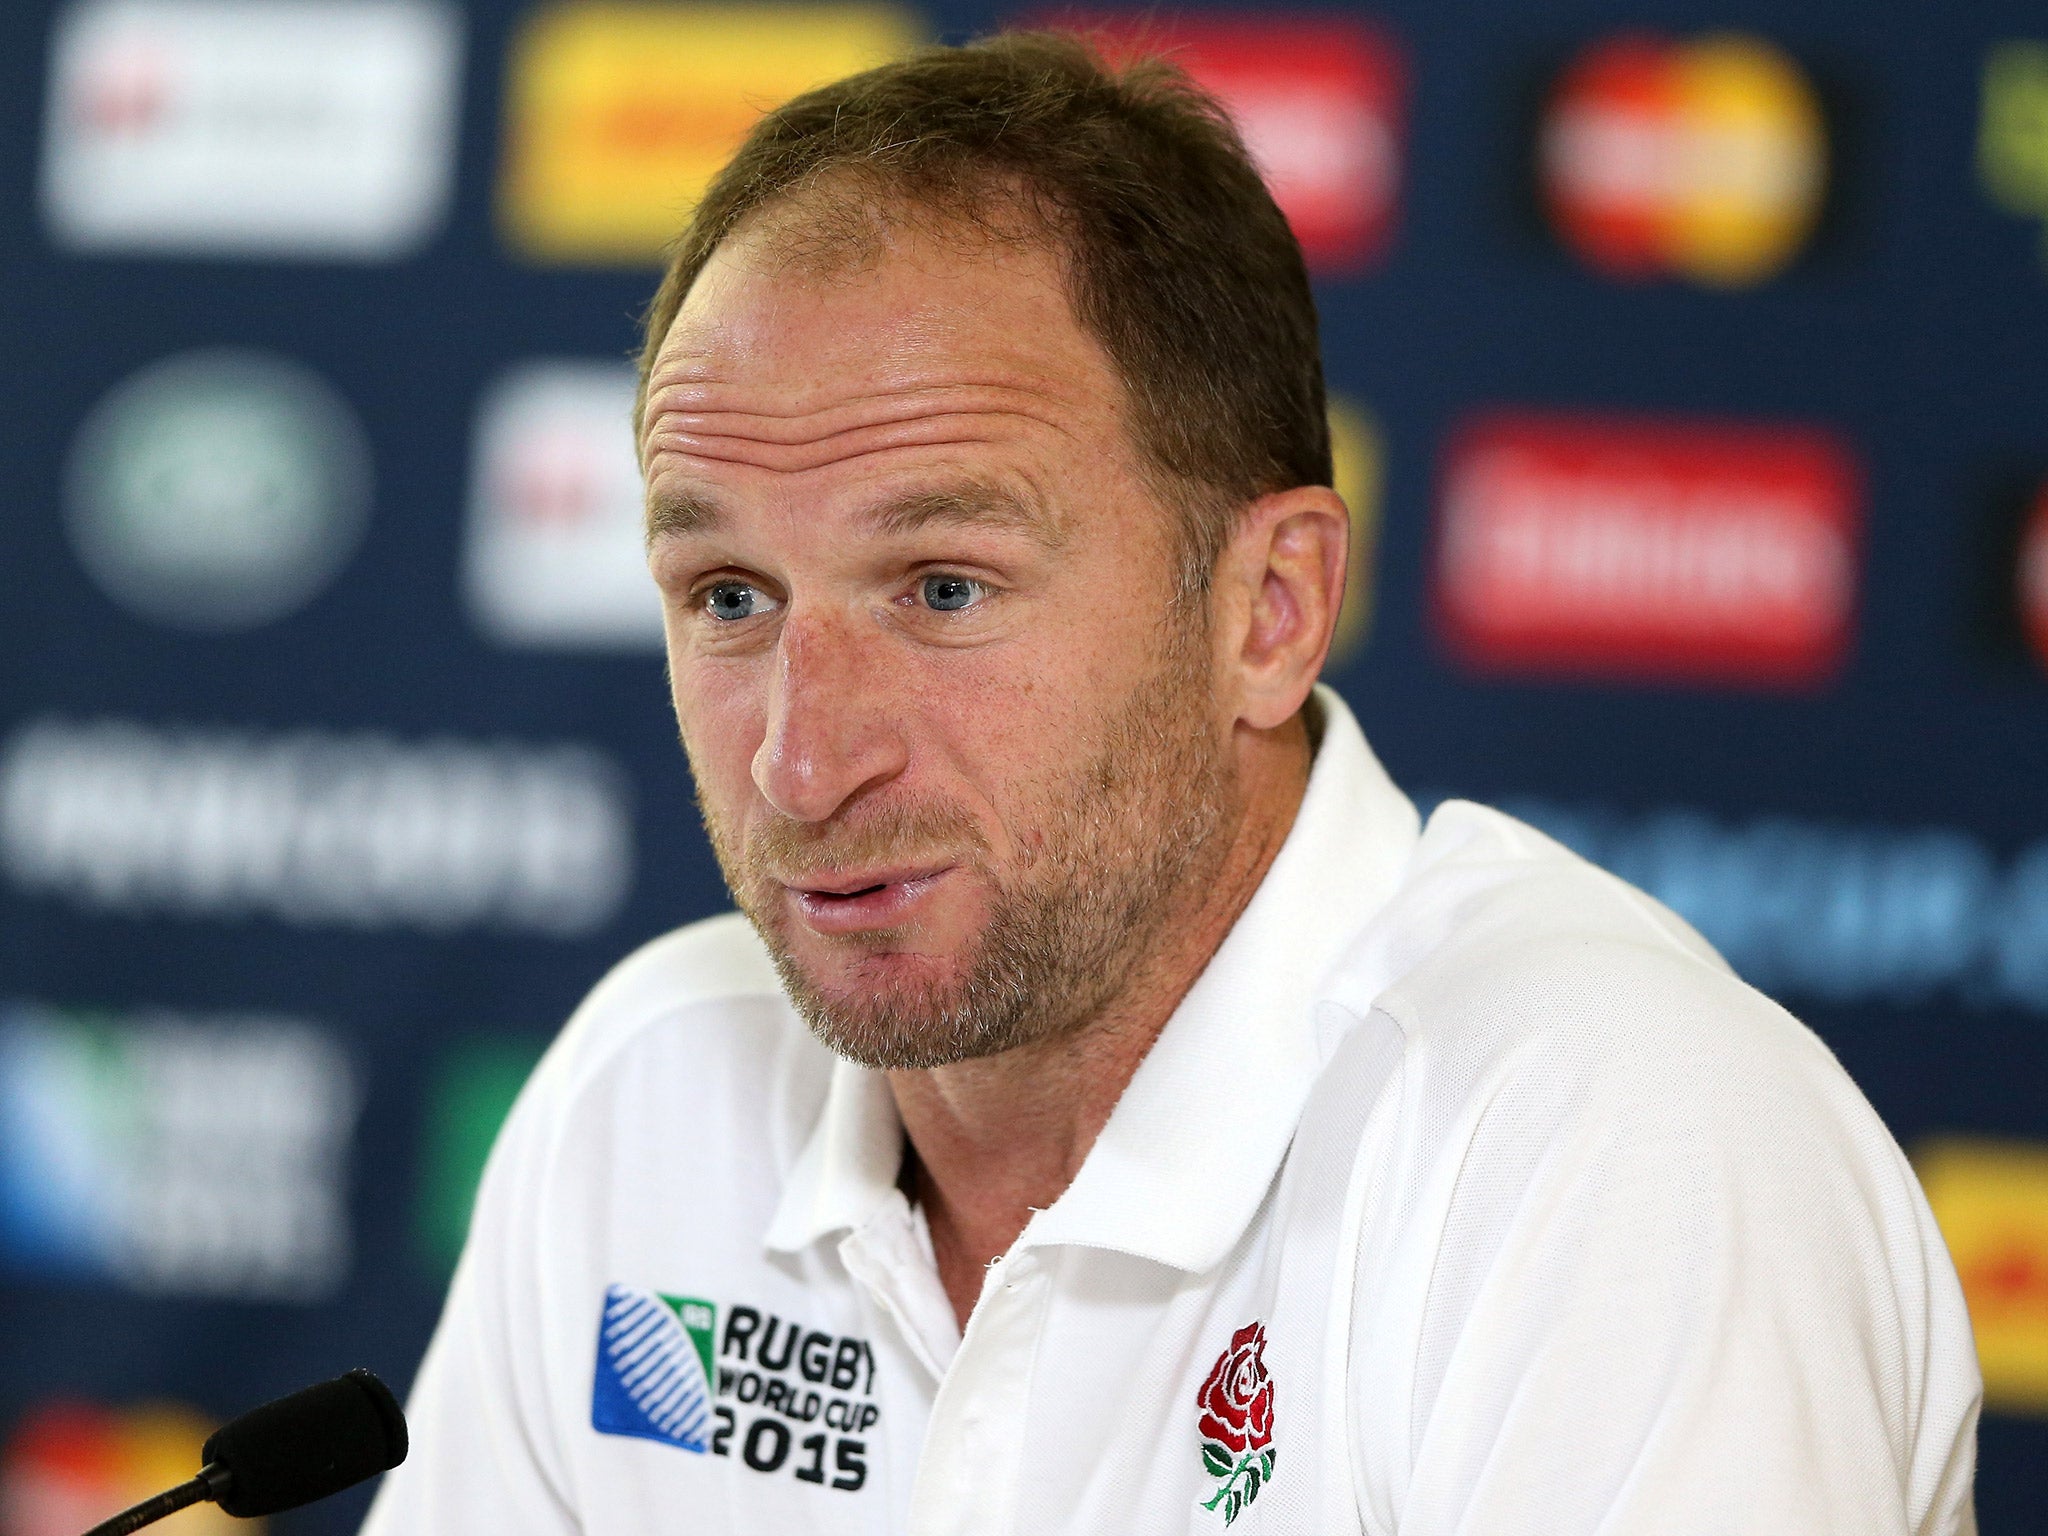 England's attacking coach reiterated their focus is on beating Australia